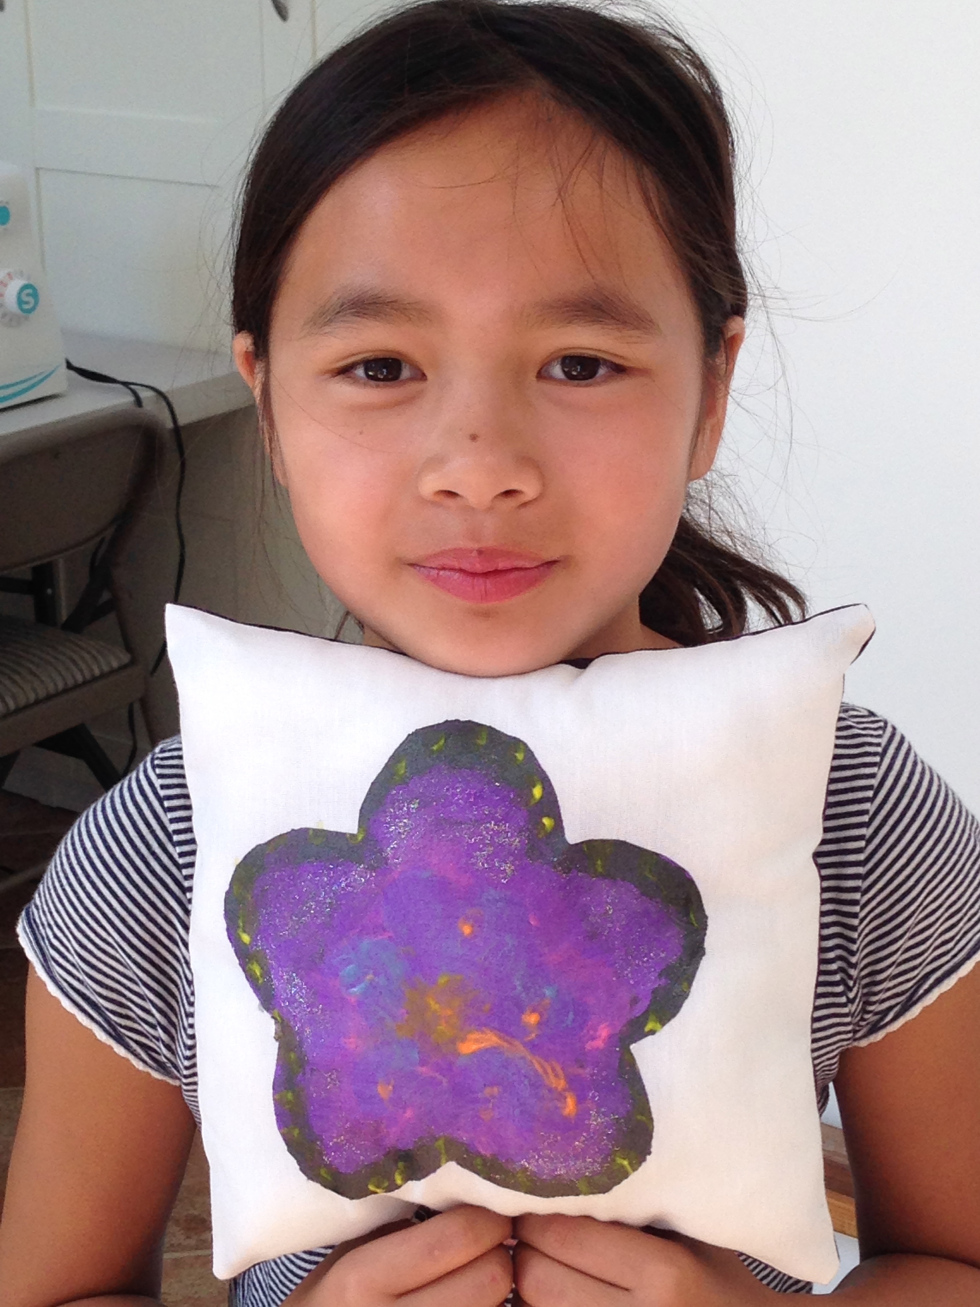  4th grader fabric painted pillow. 